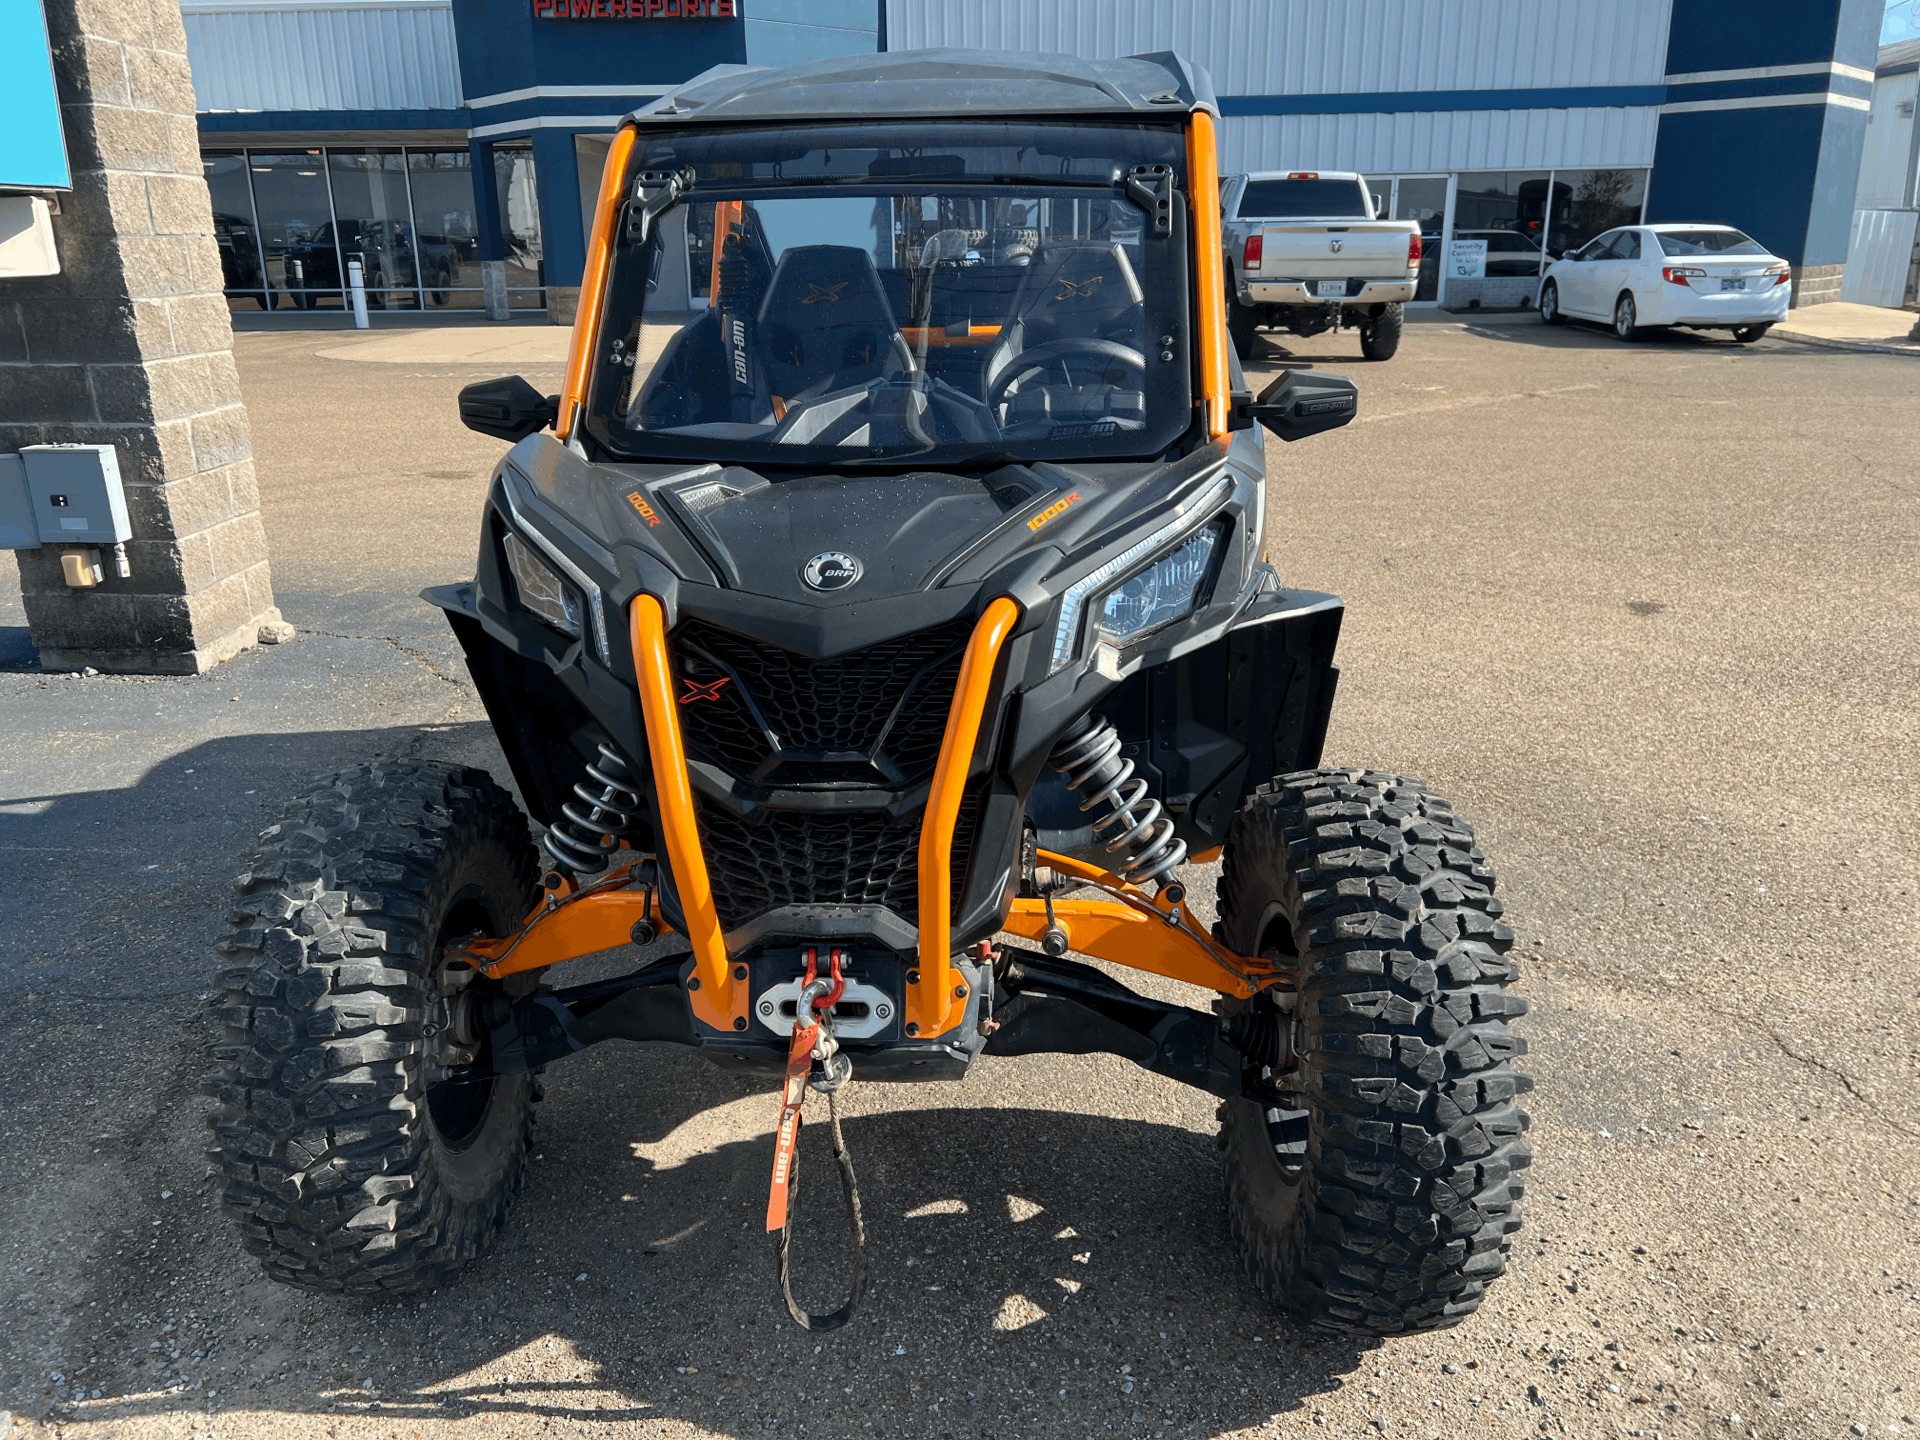 2020 Can-Am Maverick Sport X RC 1000R in Dyersburg, Tennessee - Photo 9